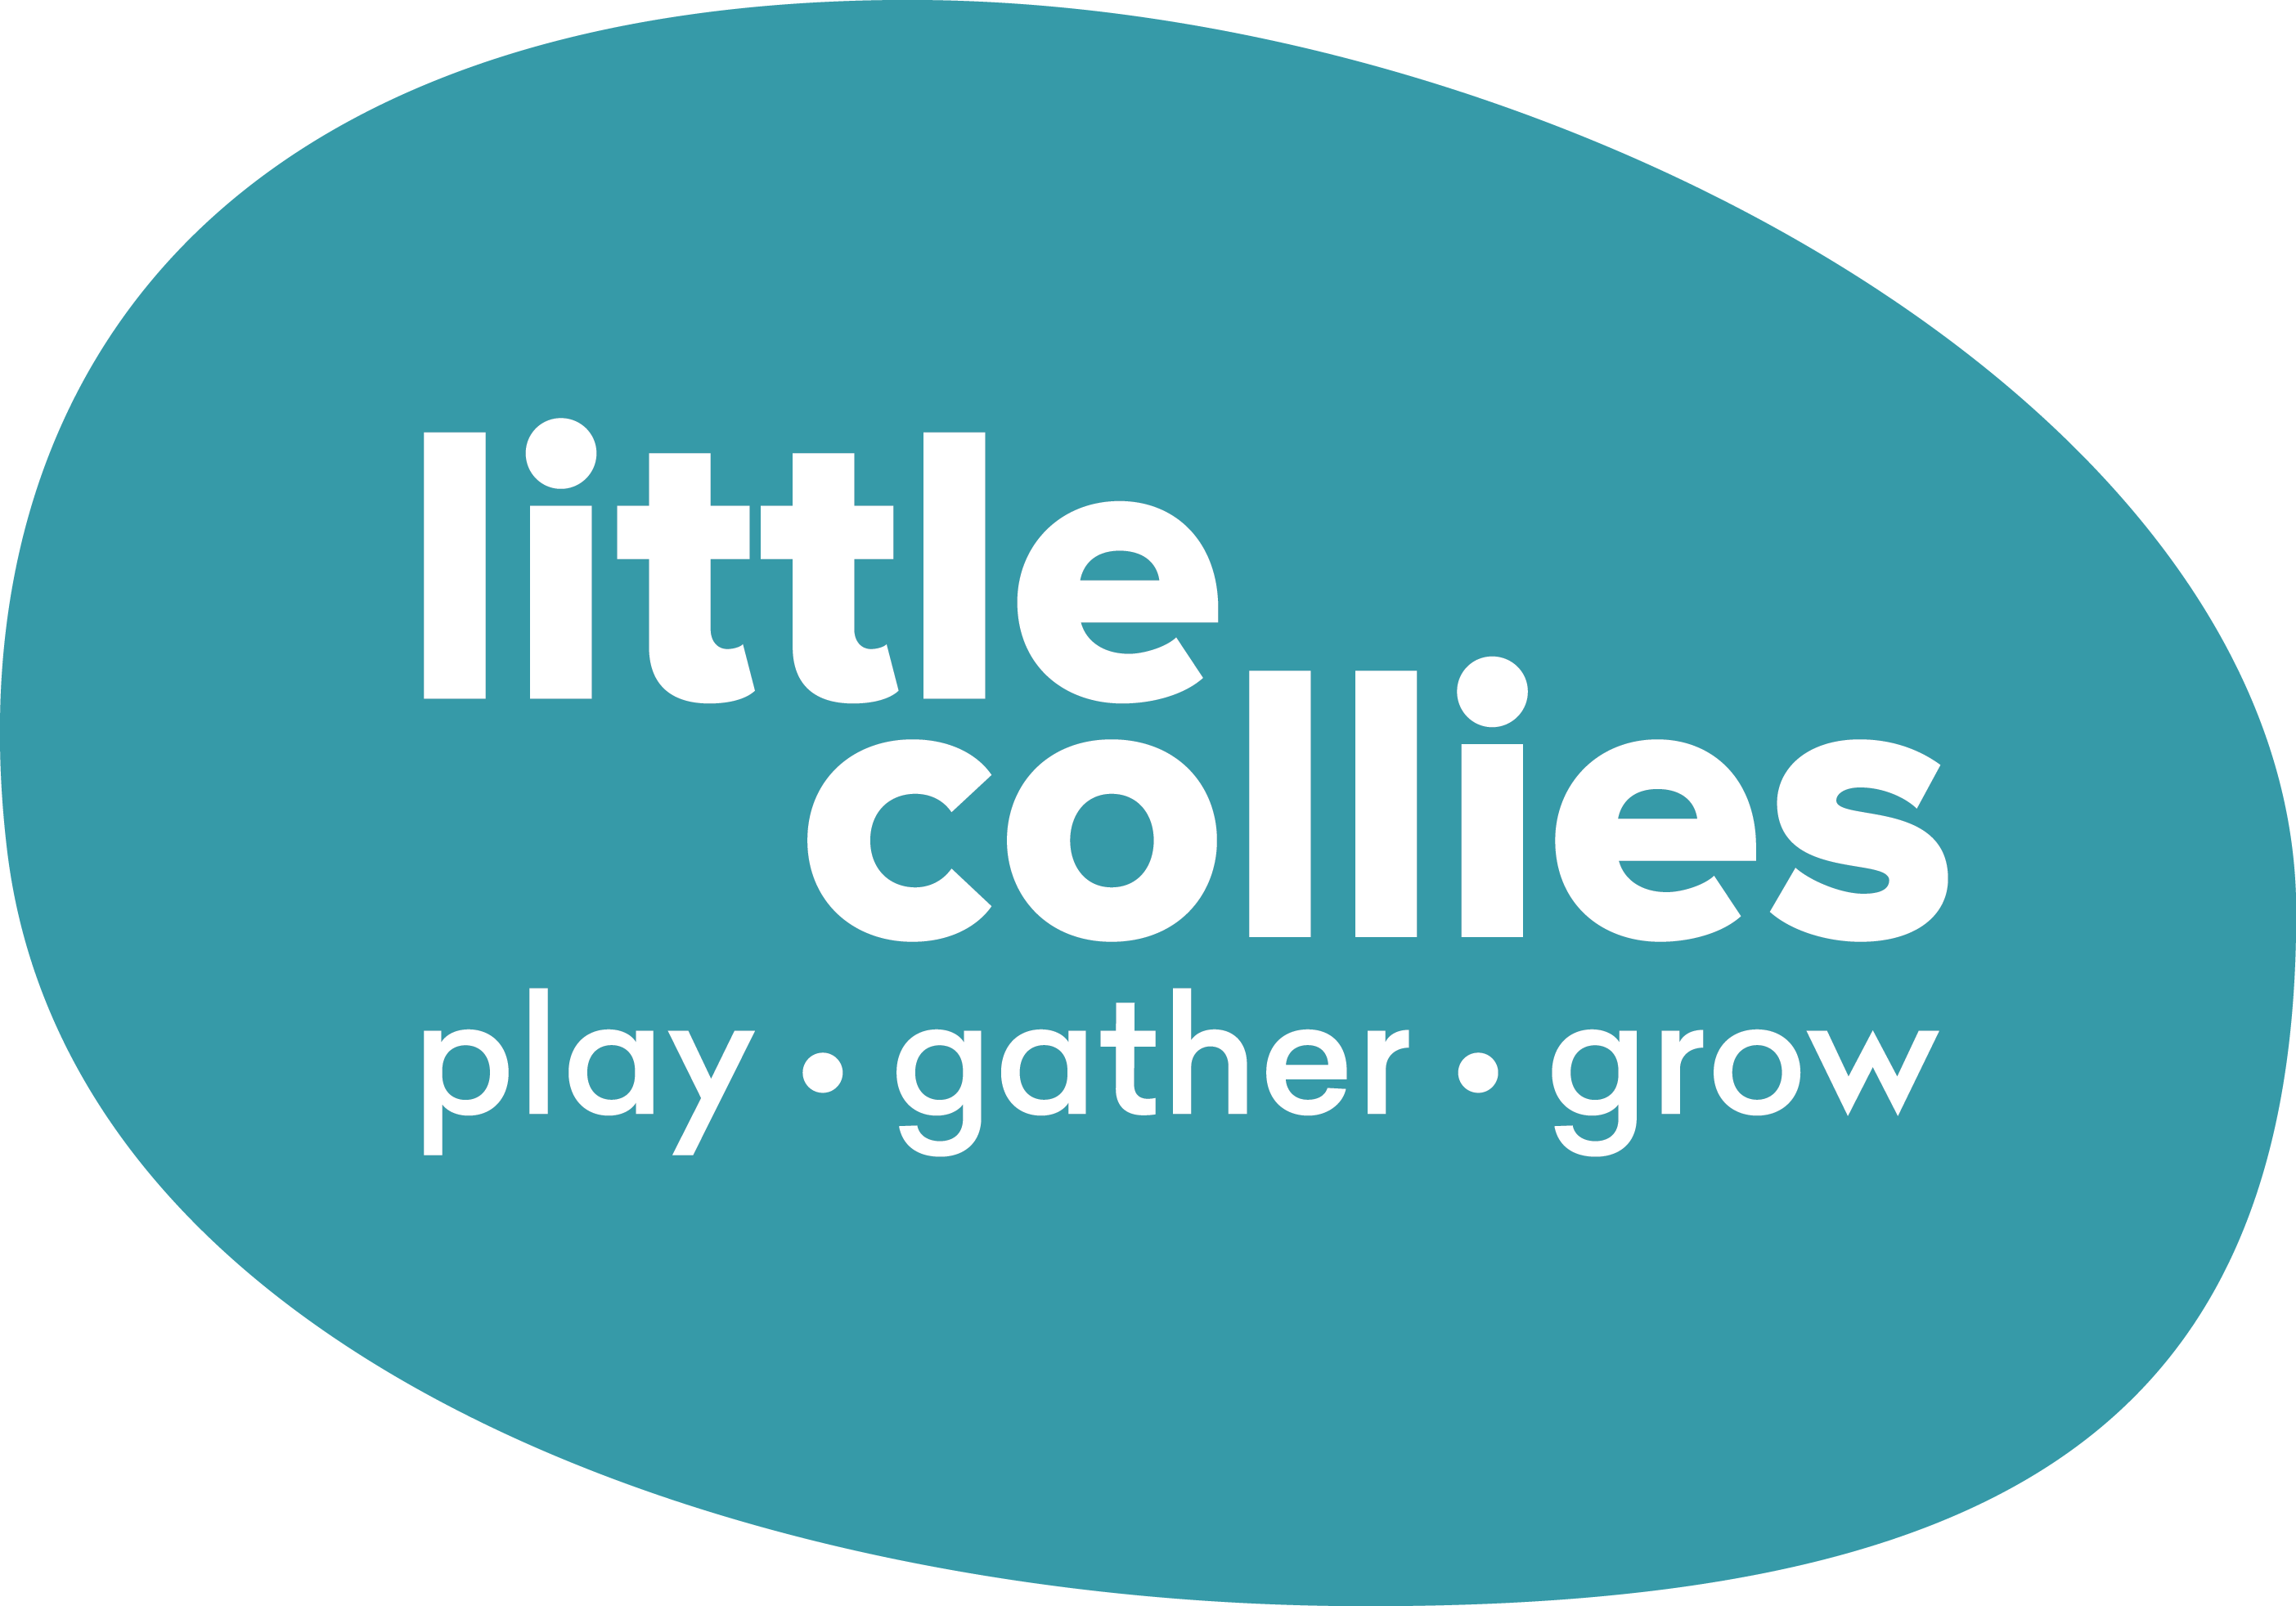 little-collies-circle (1).png